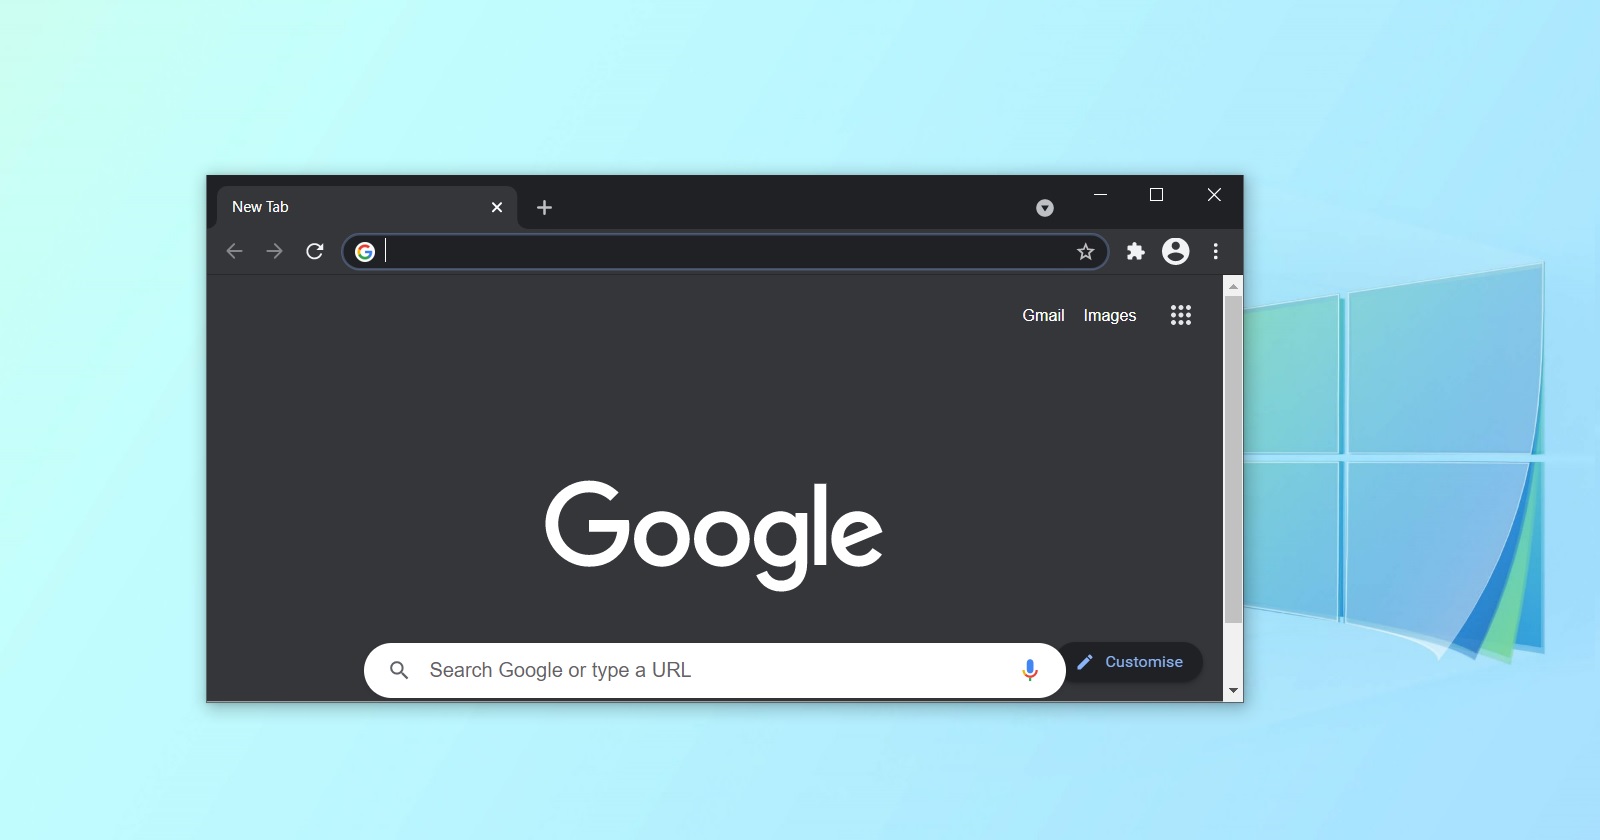 Maximize productivity by optimizing Chrome's address bar display
Enhance browsing experience with a fully functional address bar